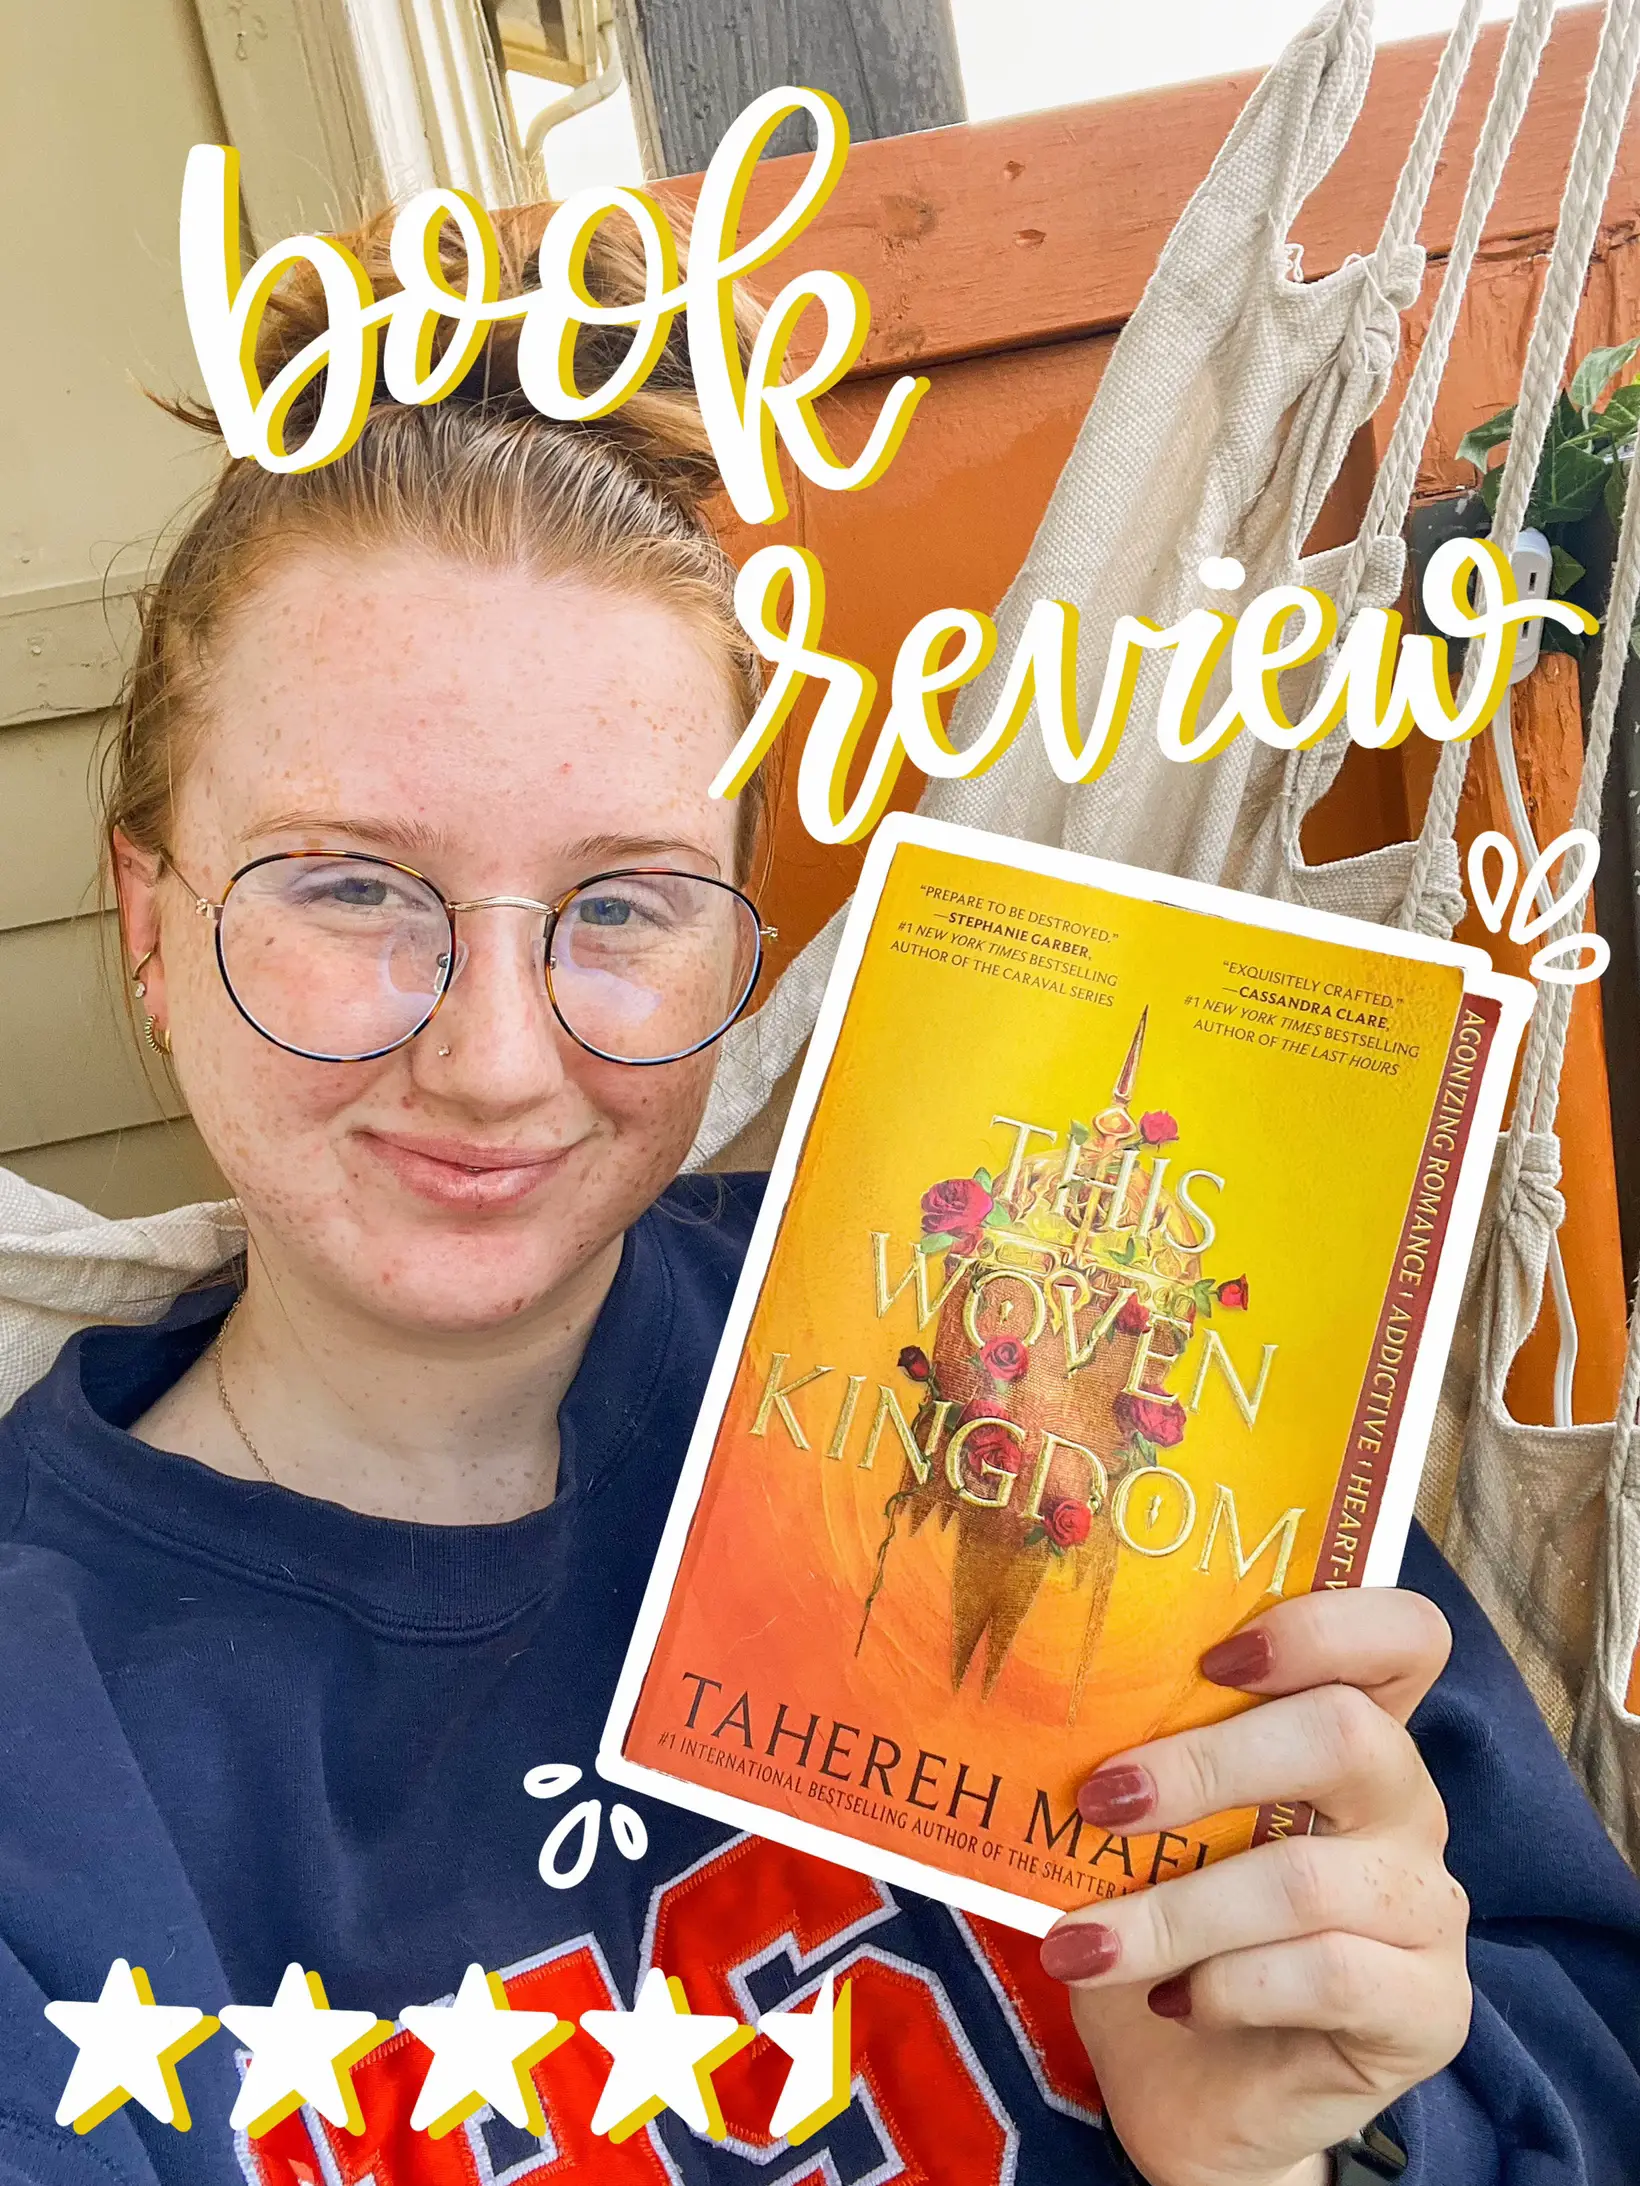 Book Review: This Woven Kingdom by Tahereh Mafi - Fangirlish